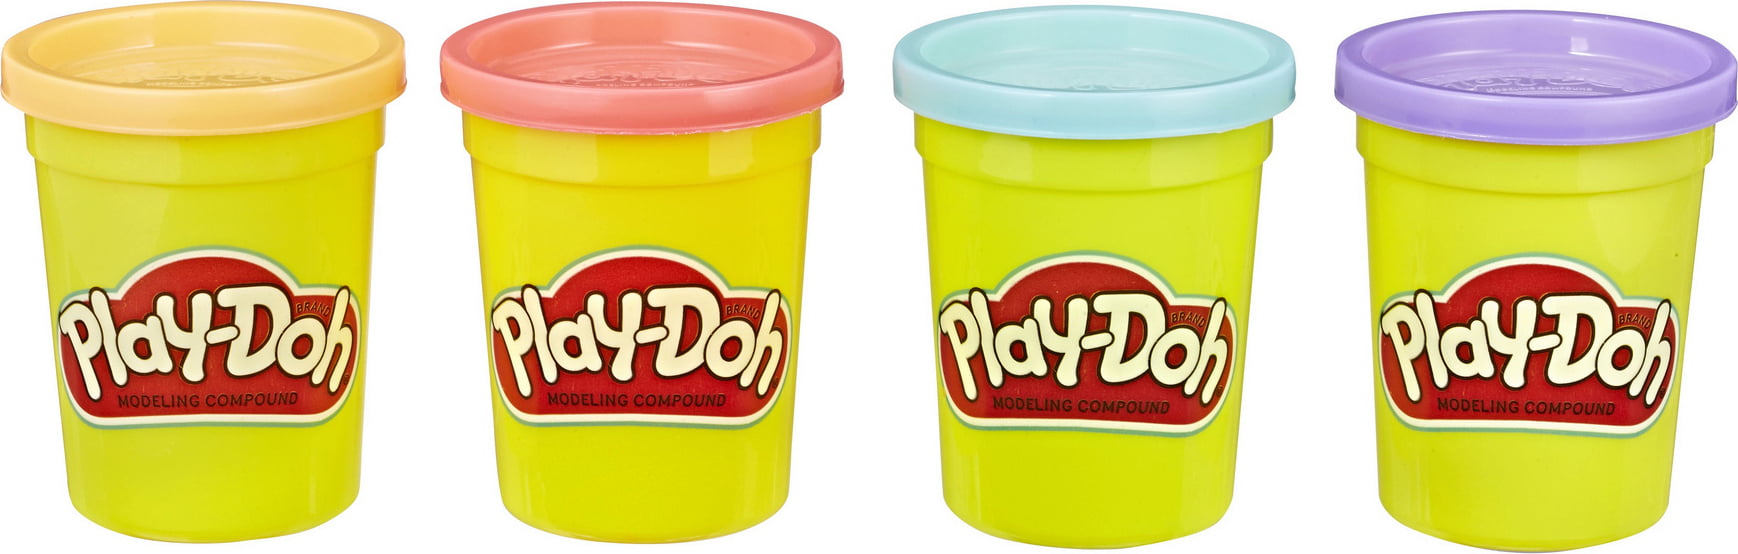 Play-doh 4pack Sweet